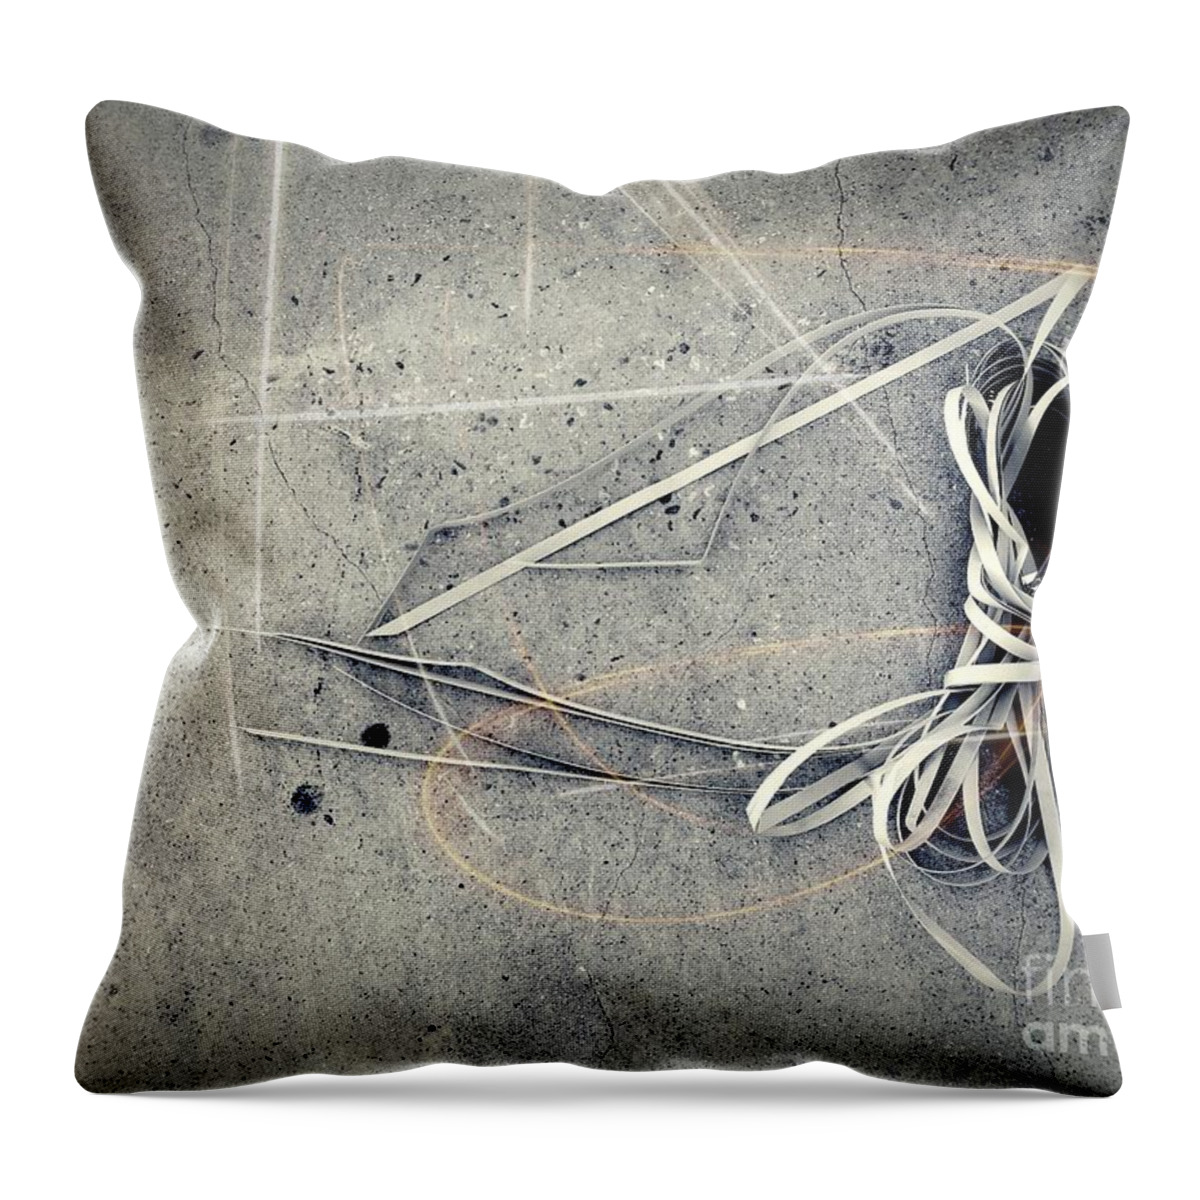 Abstract Throw Pillow featuring the photograph Winding Knot by Fei A